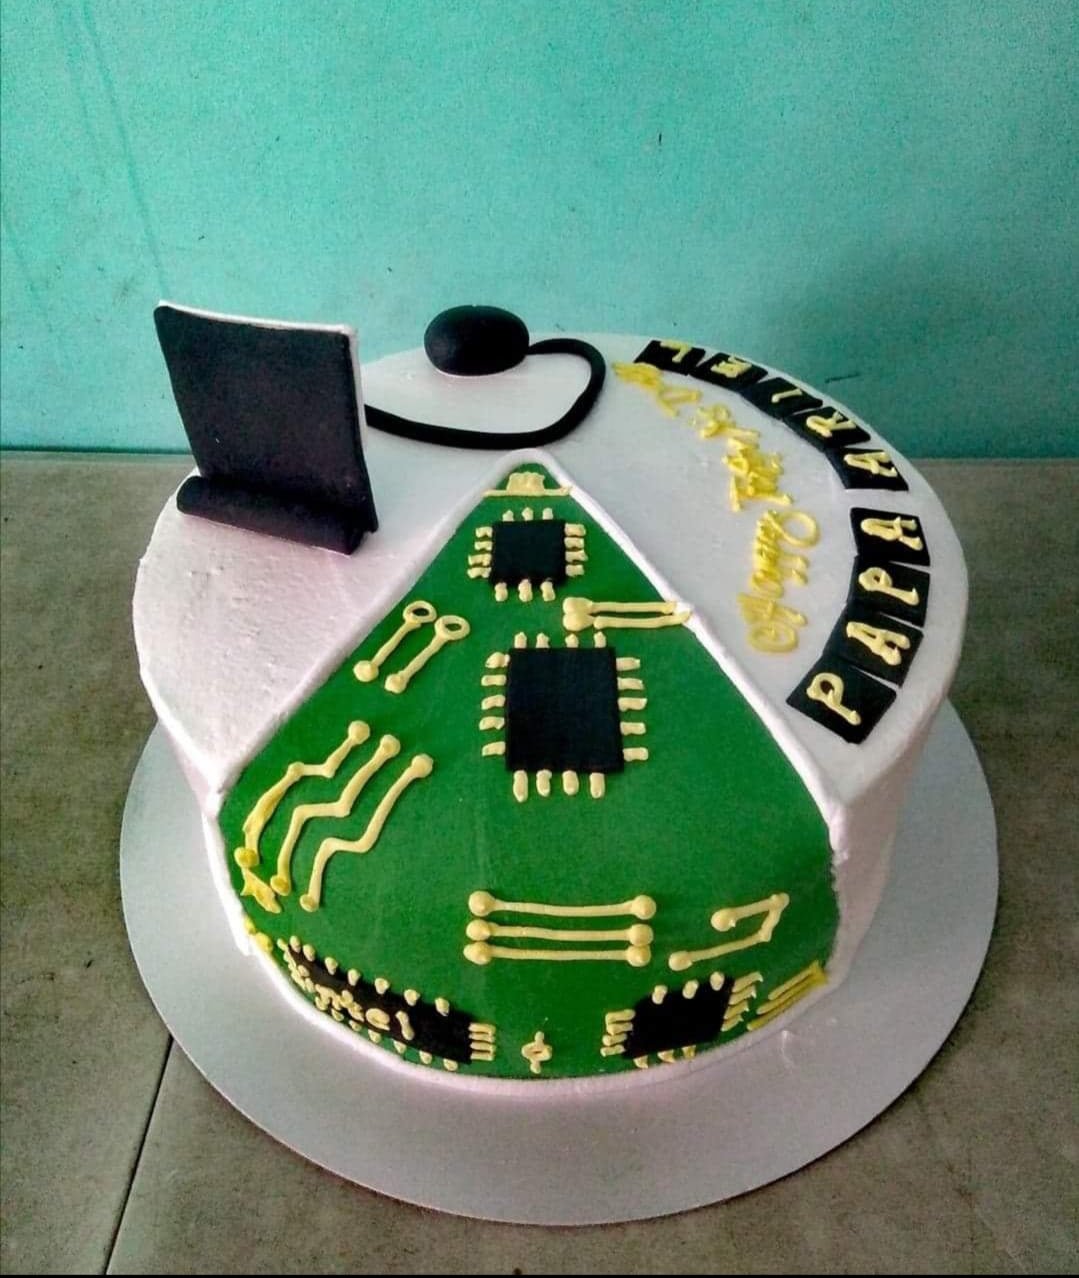 software engineer theme cake... - Aarush's Cake Delight | Facebook